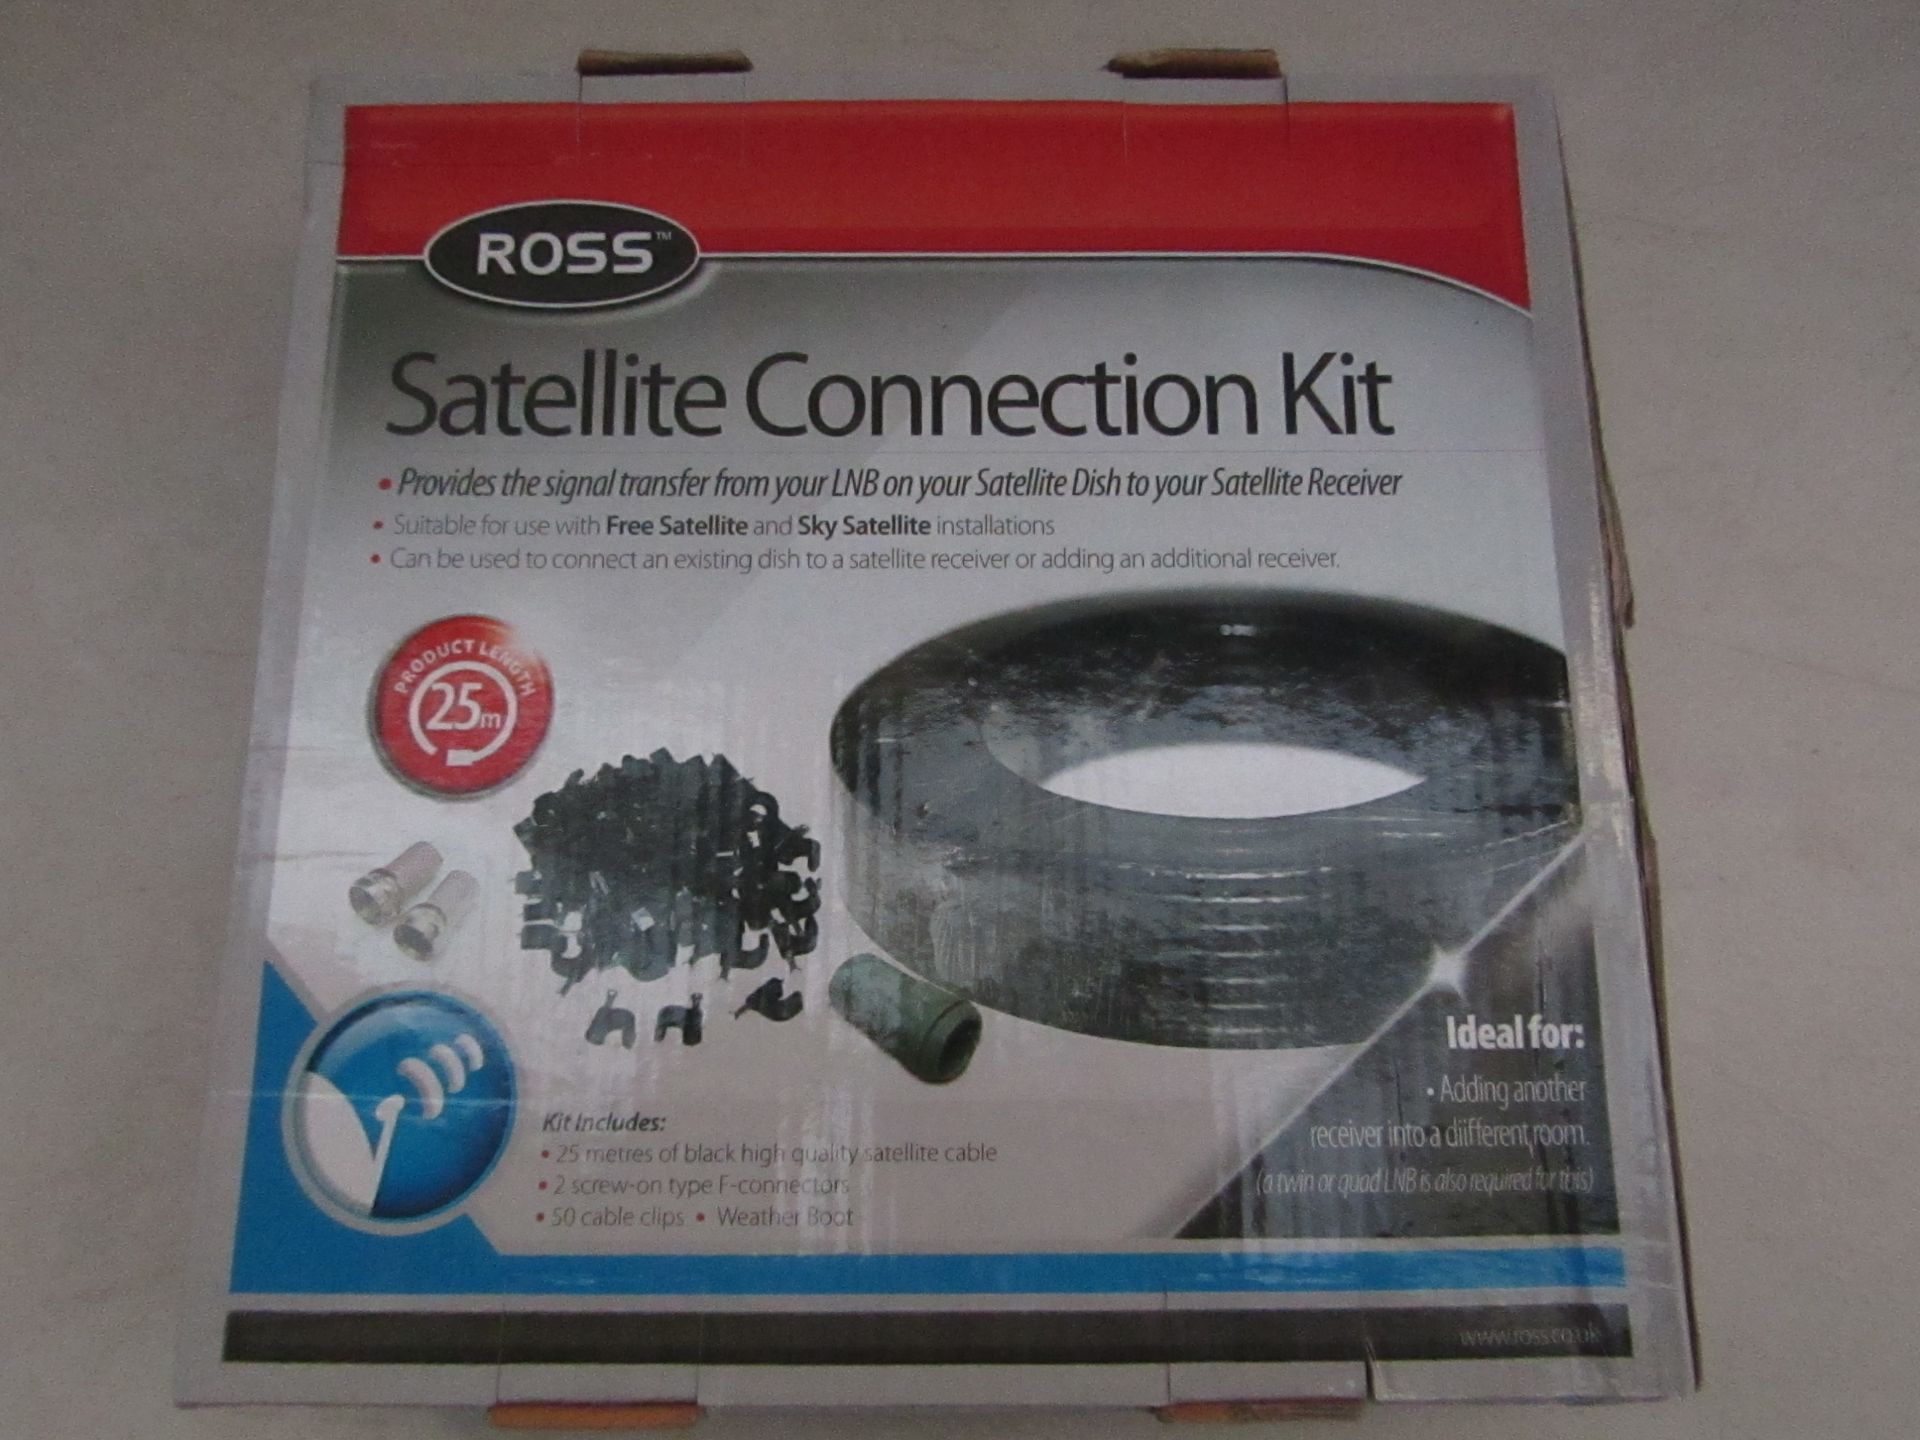 Ross satellite connection kit, new and boxed.